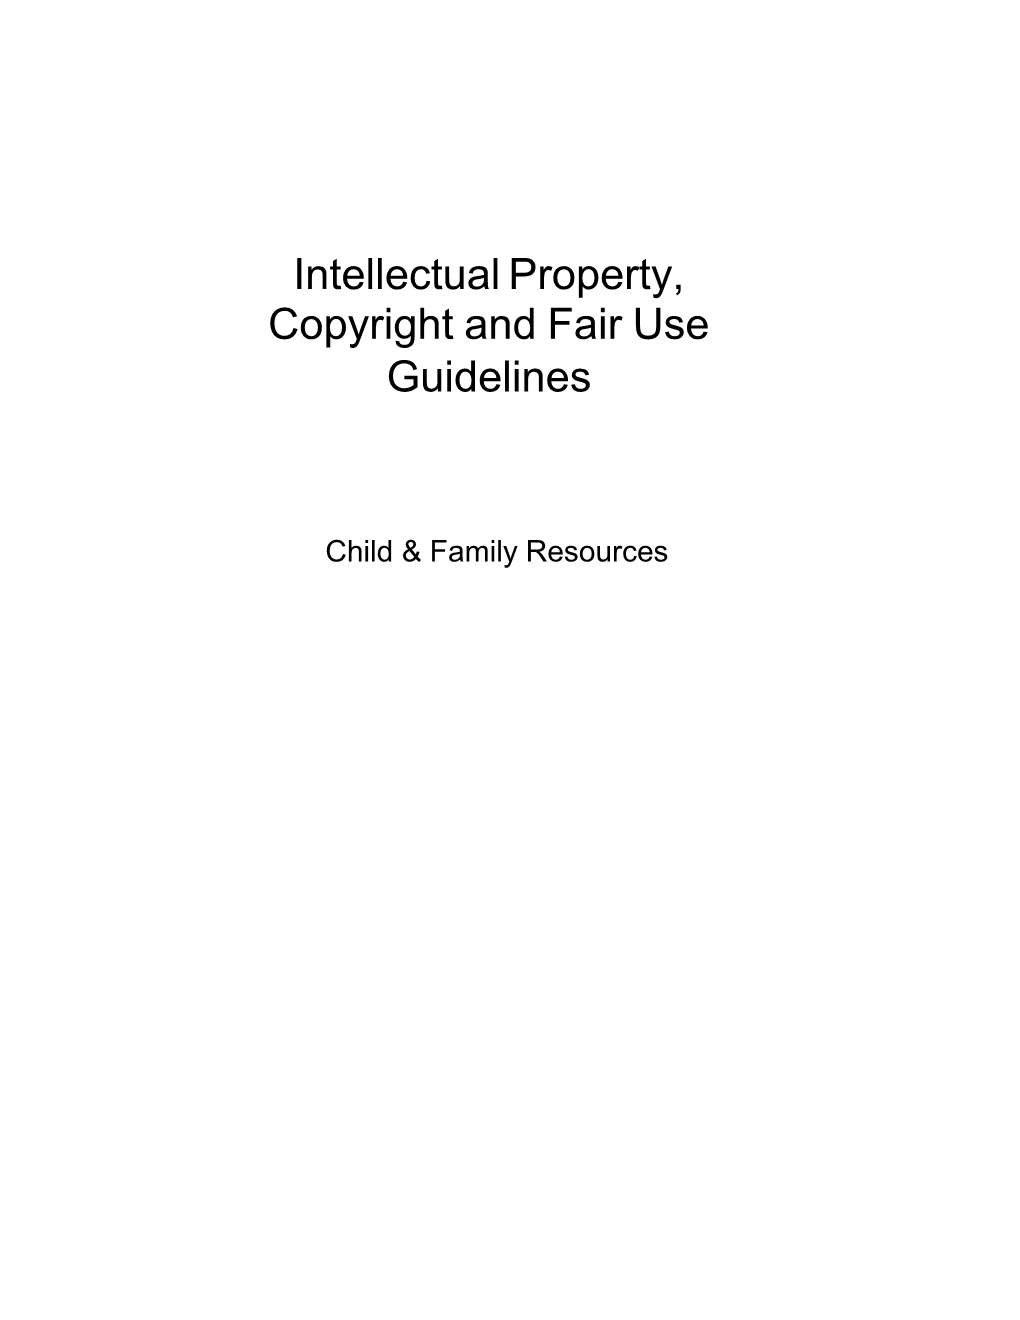 Intellectual Property, Copyright, and Fair